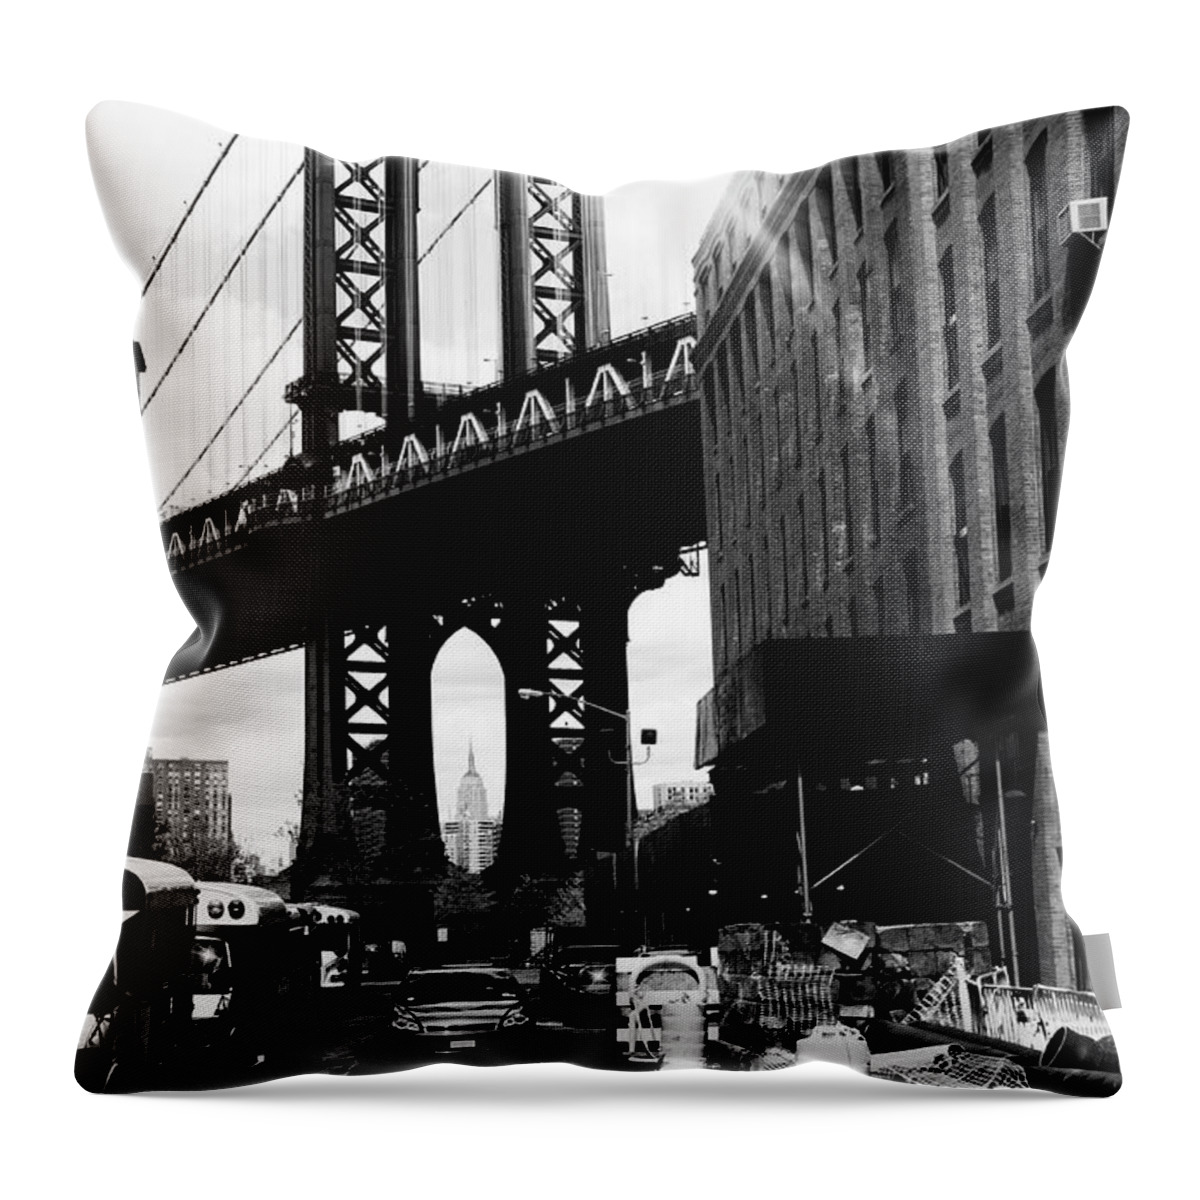 Built Structure Throw Pillow featuring the photograph Manhattan Bridge,nyc by Lisa-blue